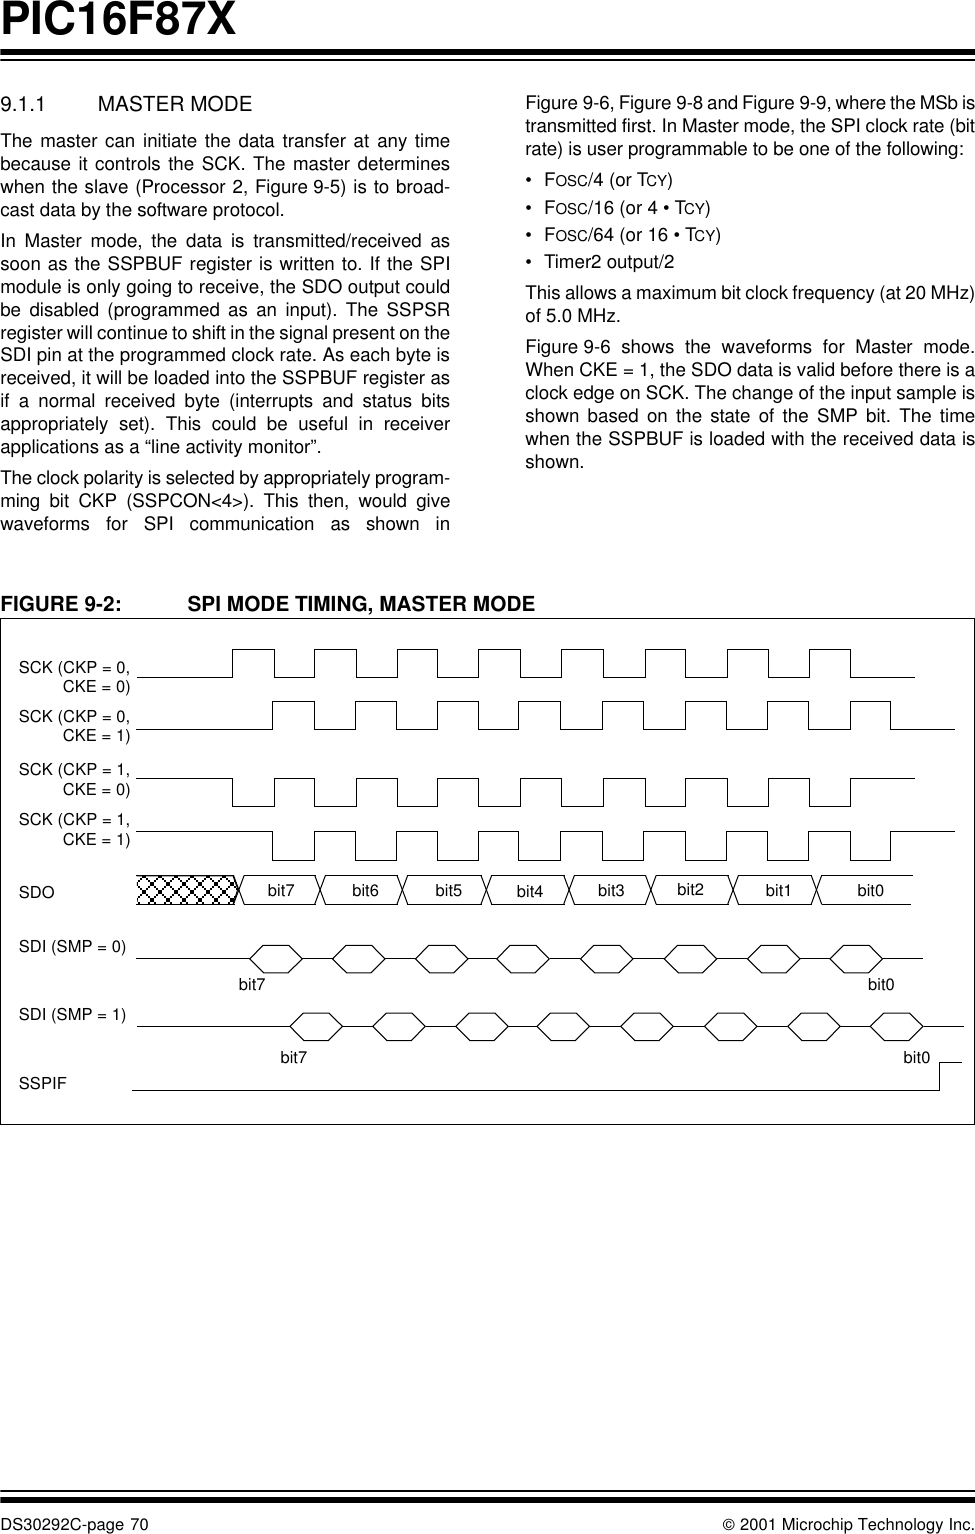 PIC16F87XDS30292C-page 70  2001 Microchip Technology Inc.9.1.1 MASTER MODEThe master can initiate the data transfer at any timebecause it controls the SCK. The master determineswhen the slave (Processor 2, Figure 9-5) is to broad-cast data by the software protocol.In Master mode, the data is transmitted/received assoon as the SSPBUF register is written to. If the SPImodule is only going to receive, the SDO output couldbe disabled (programmed as an input). The SSPSRregister will continue to shift in the signal present on theSDI pin at the programmed clock rate. As each byte isreceived, it will be loaded into the SSPBUF register asif a normal received byte (interrupts and status bitsappropriately set). This could be useful in receiverapplications as a “line activity monitor”.The clock polarity is selected by appropriately program-ming bit CKP (SSPCON&lt;4&gt;). This then, would givewaveforms for SPI communication as shown inFigure 9-6, Figure 9-8 and Figure 9-9, where the MSb istransmitted first. In Master mode, the SPI clock rate (bitrate) is user programmable to be one of the following:•FOSC/4 (or TCY)•FOSC/16 (or 4 • TCY)•FOSC/64 (or 16 • TCY)•Timer2 output/2This allows a maximum bit clock frequency (at 20 MHz)of 5.0 MHz.Figure 9-6 shows the waveforms for Master mode.When CKE = 1, the SDO data is valid before there is aclock edge on SCK. The change of the input sample isshown based on the state of the SMP bit. The timewhen the SSPBUF is loaded with the received data isshown.FIGURE 9-2: SPI MODE TIMING, MASTER MODE SCK (CKP = 0, SDI (SMP = 0)SSPIFbit7 bit6 bit5 bit4 bit3 bit2 bit1 bit0SDI (SMP = 1)SCK (CKP = 0, SCK (CKP = 1, SCK (CKP = 1, SDObit7bit7 bit0bit0CKE = 0)CKE = 1)CKE = 0)CKE = 1)